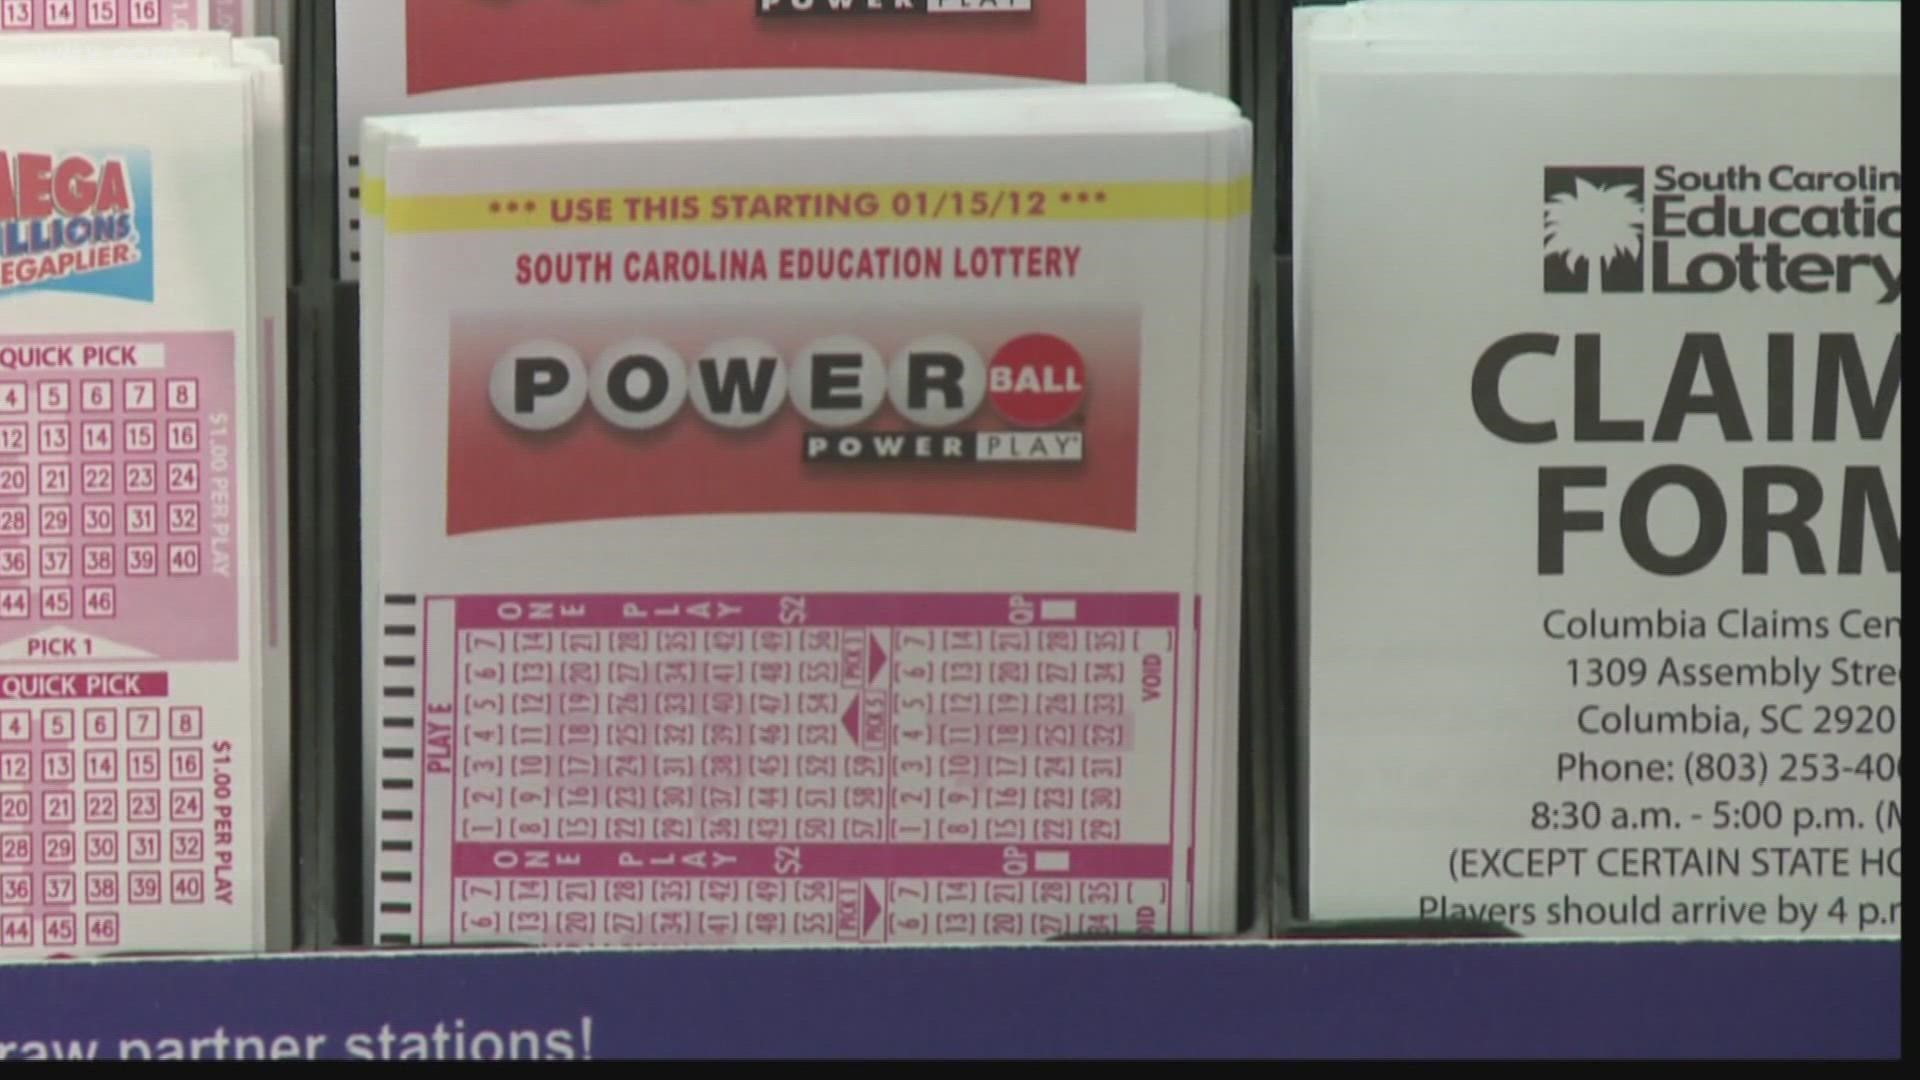 A Powerball ticket worth 2 million dollars was sold in Chester. The ticket was purchased at the Food Lion on the JA Cochran bypass.